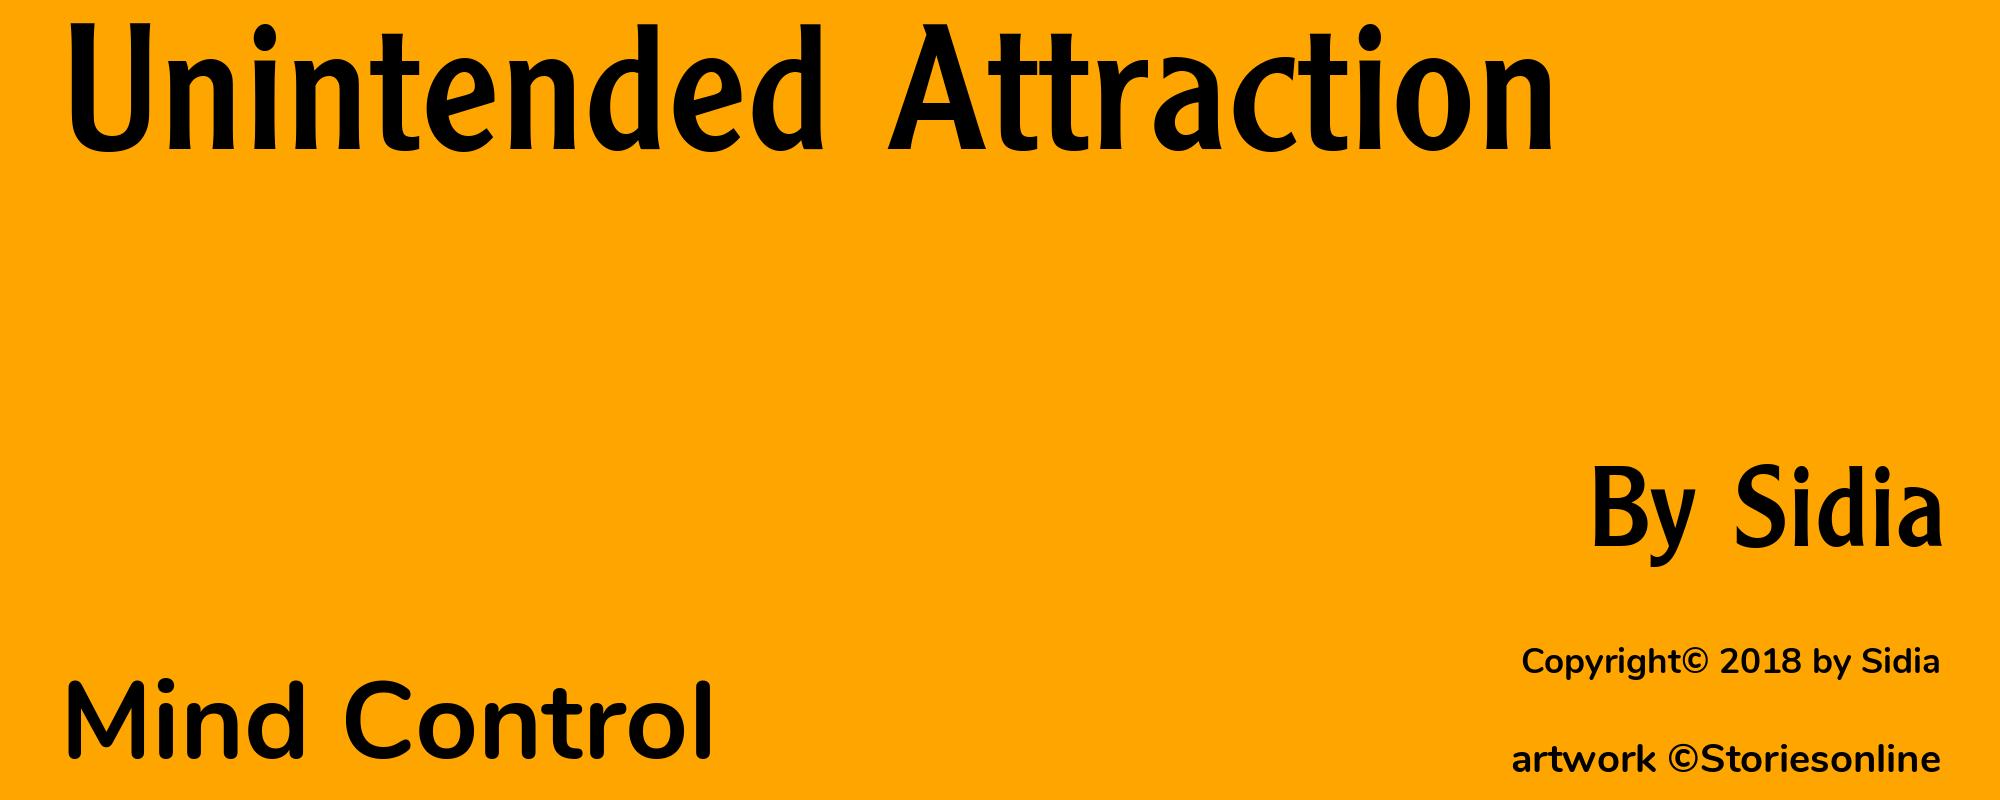 Unintended Attraction - Cover